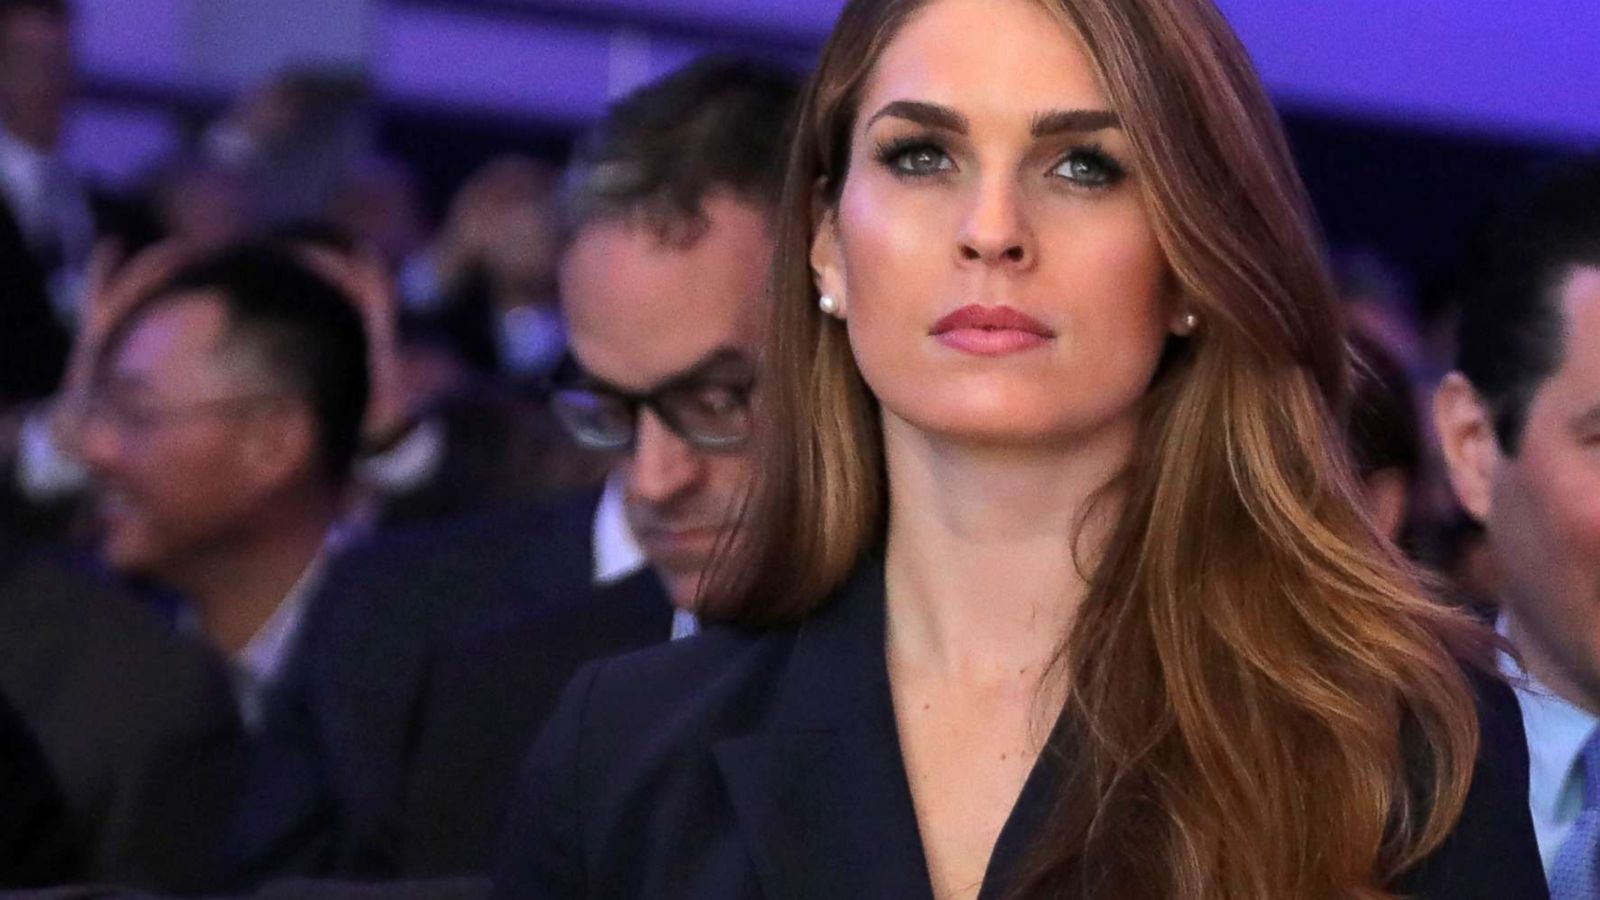 White House communications director Hope Hicks to resign - ABC News